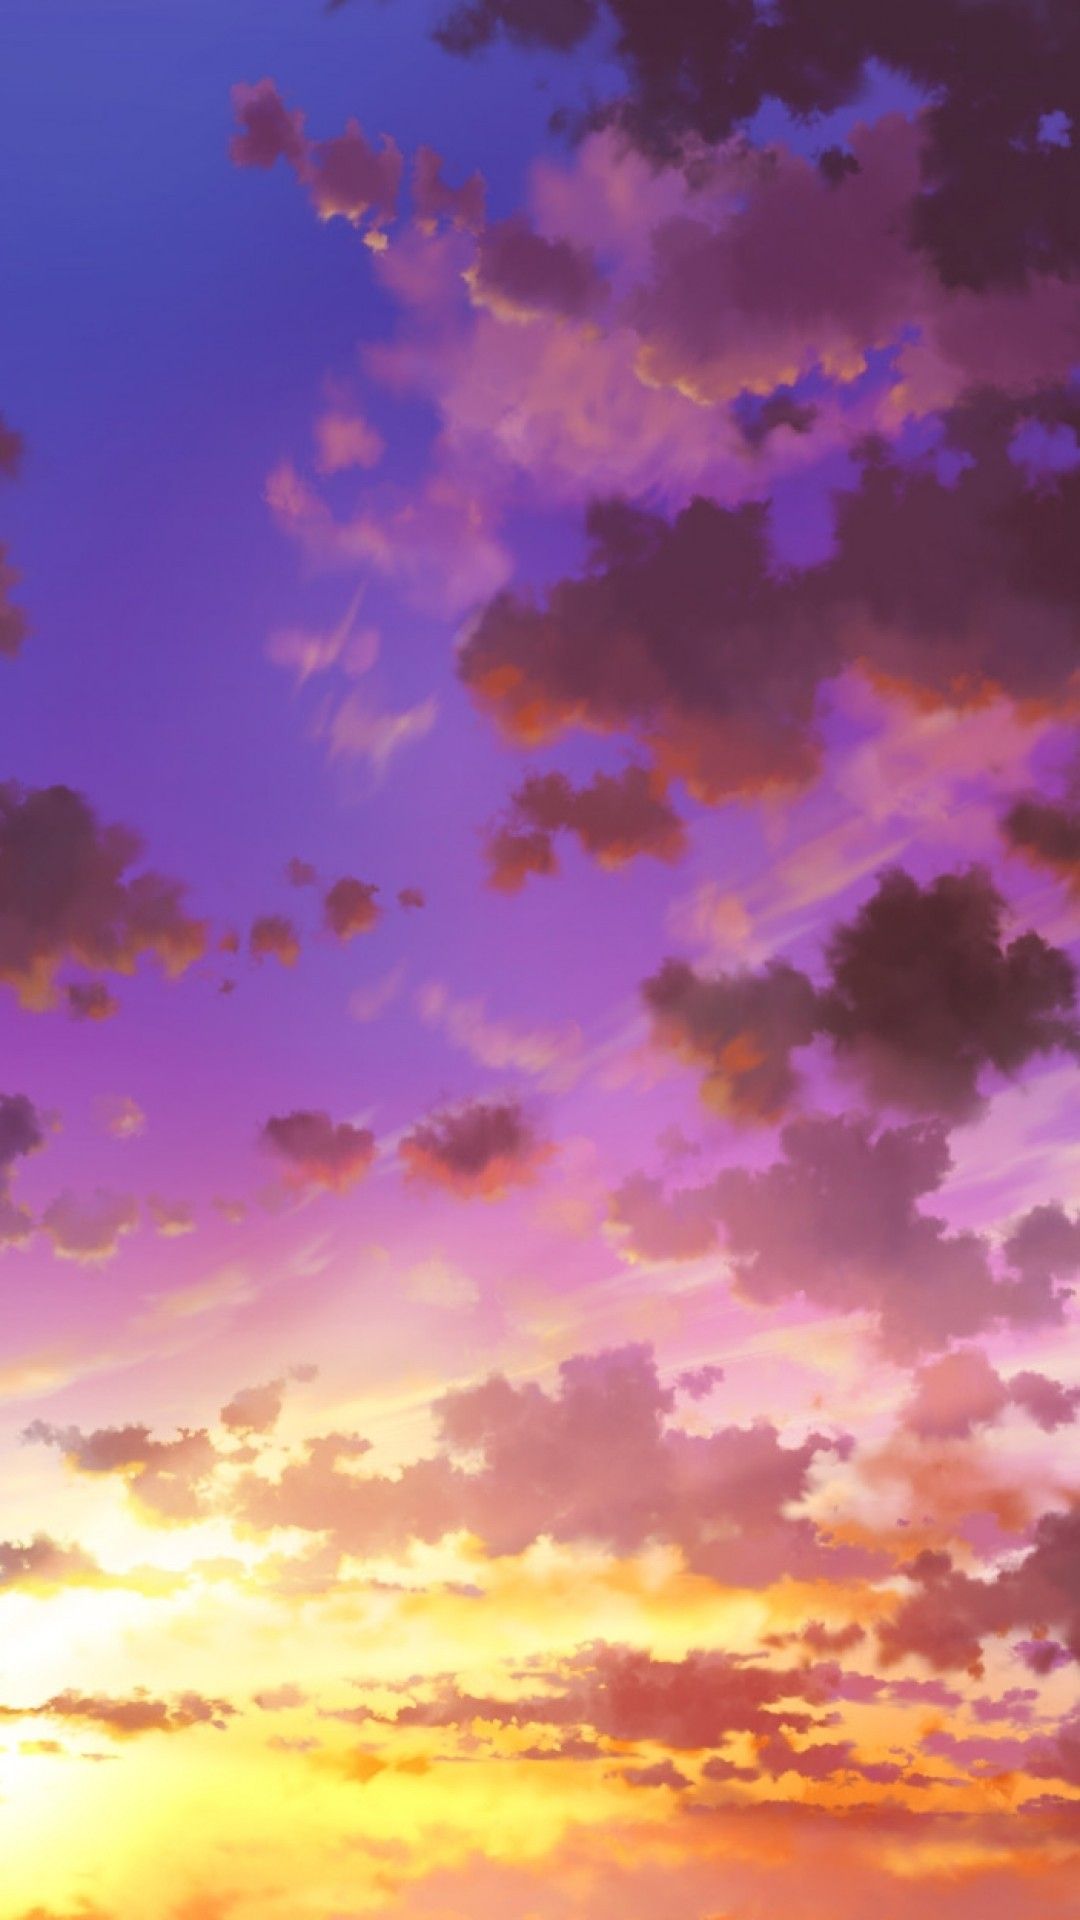 Download 1080x1920 Anime Sky, Sunset, Clouds Wallpaper for iPhone iPhone 7 Plus, iPhone 6+, Sony Xperia Z, HTC One